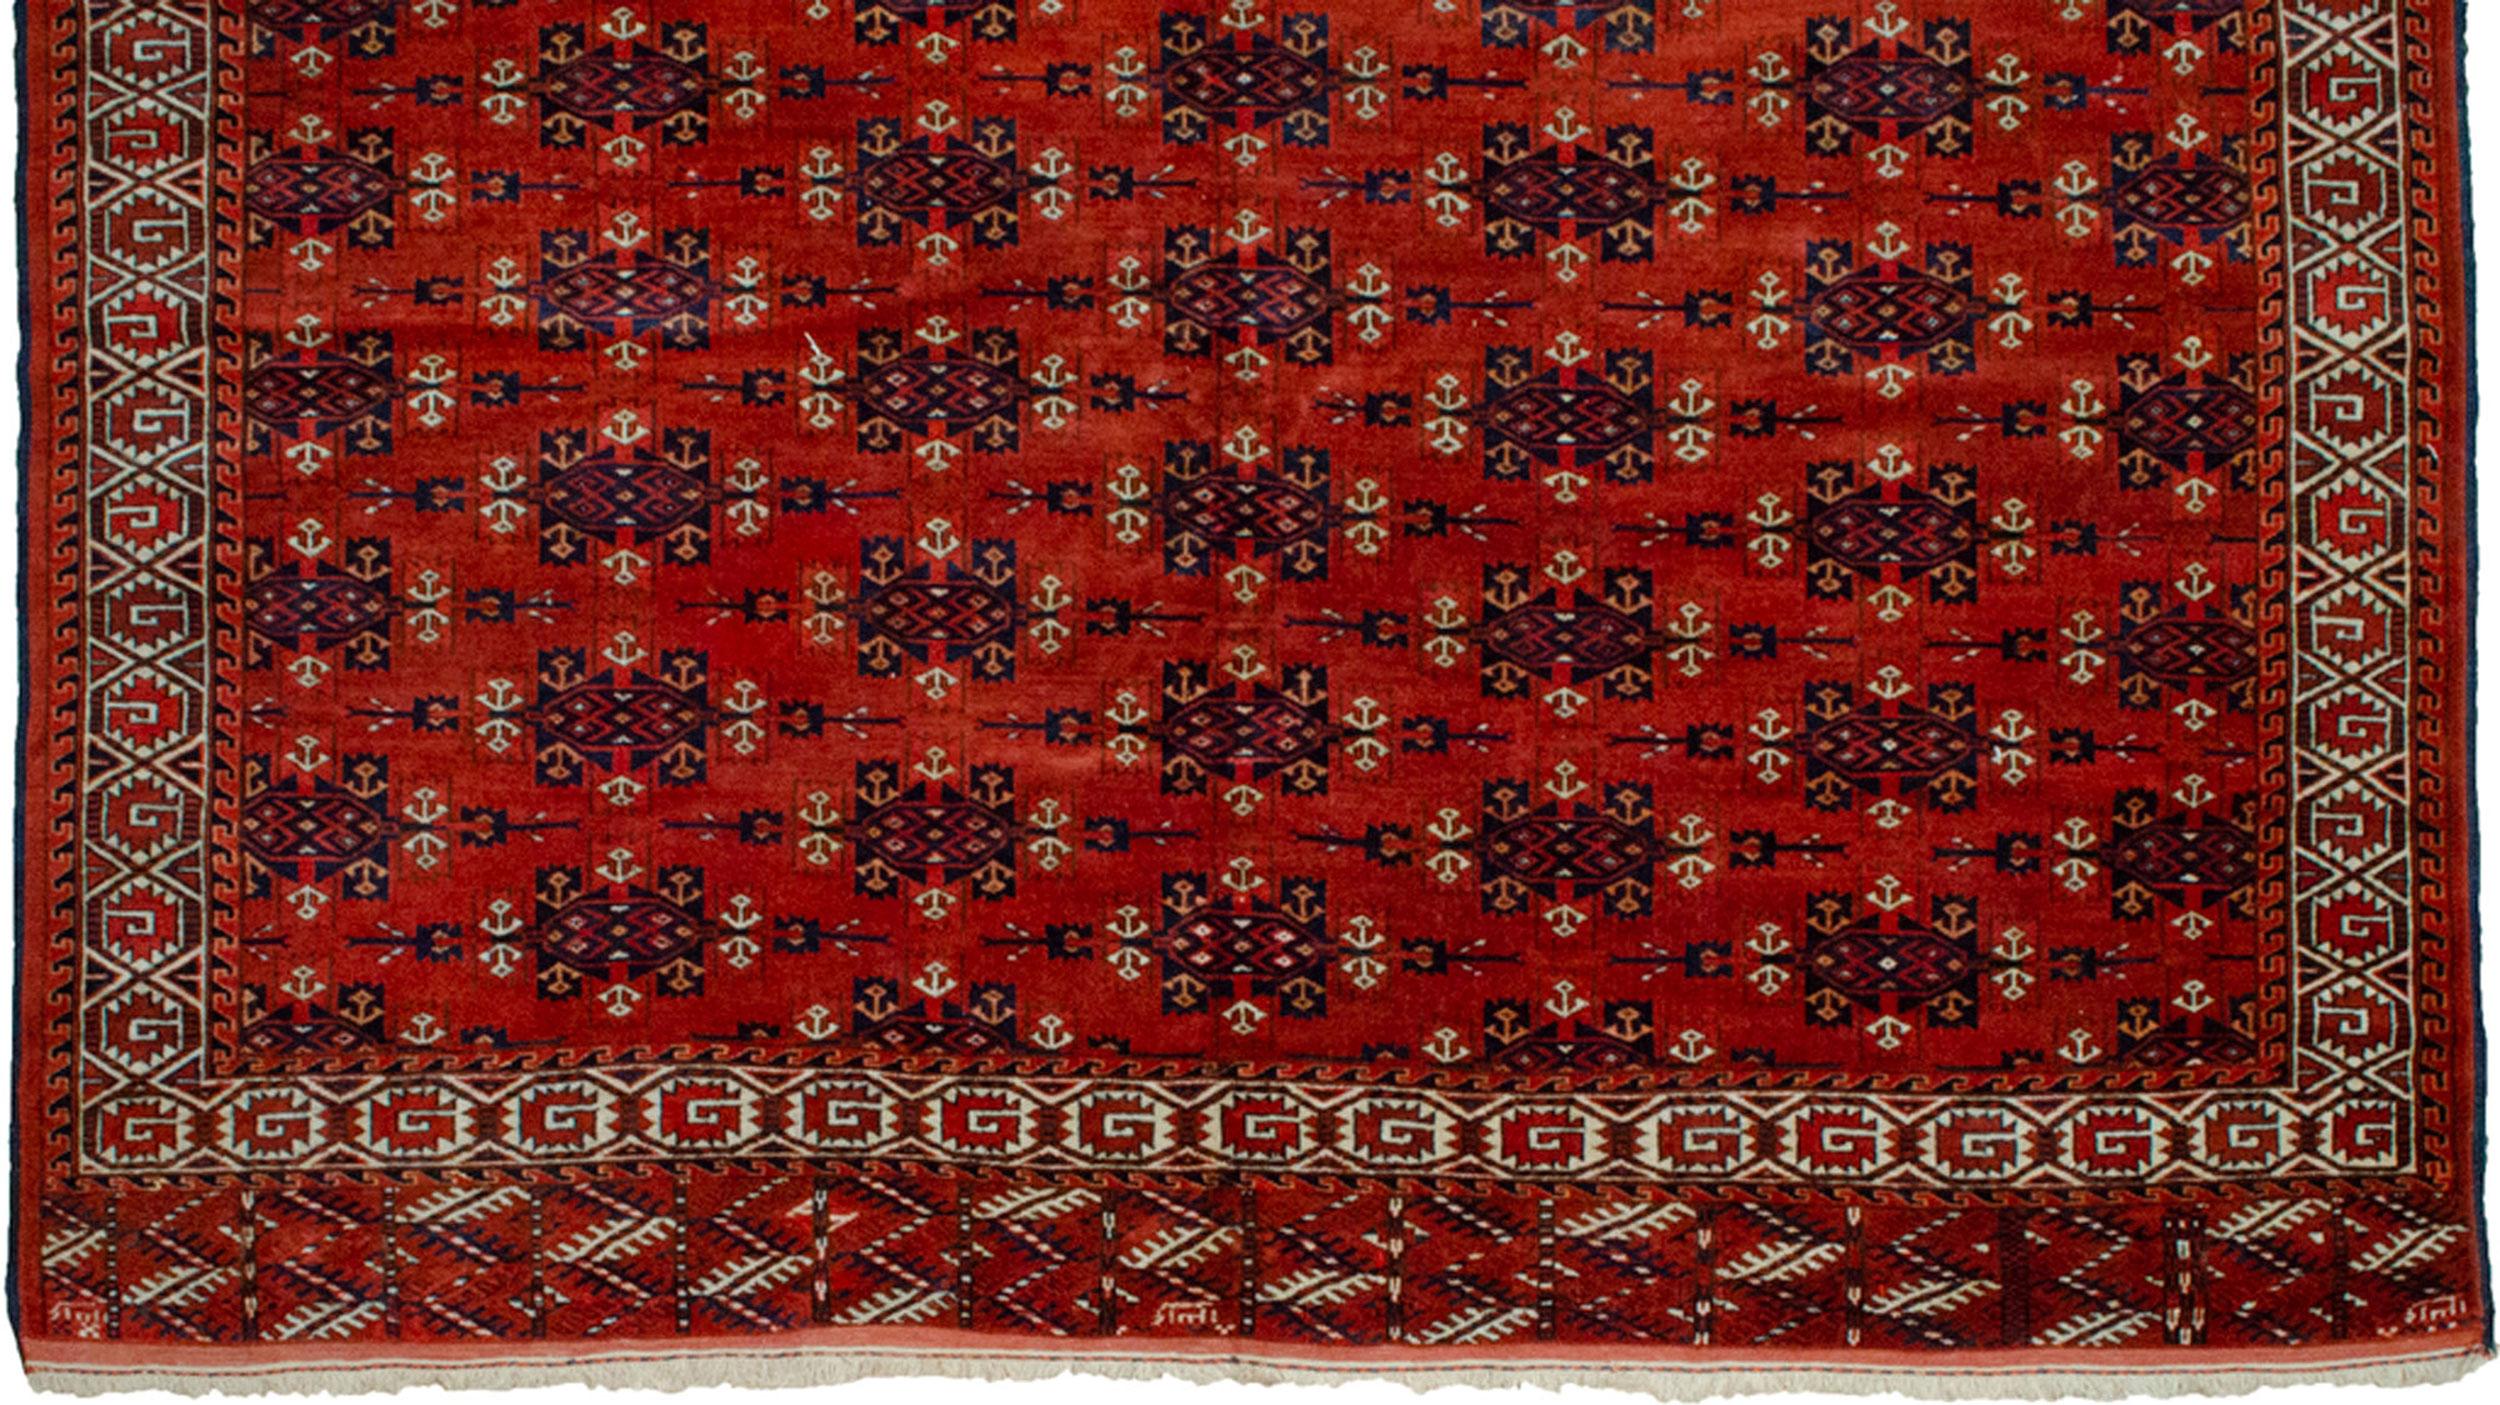 Antique Turkmen Yamoud Carpet, Turkmenistan, Circa 1900 In Good Condition For Sale In Henley-on-Thames, Oxfordshire